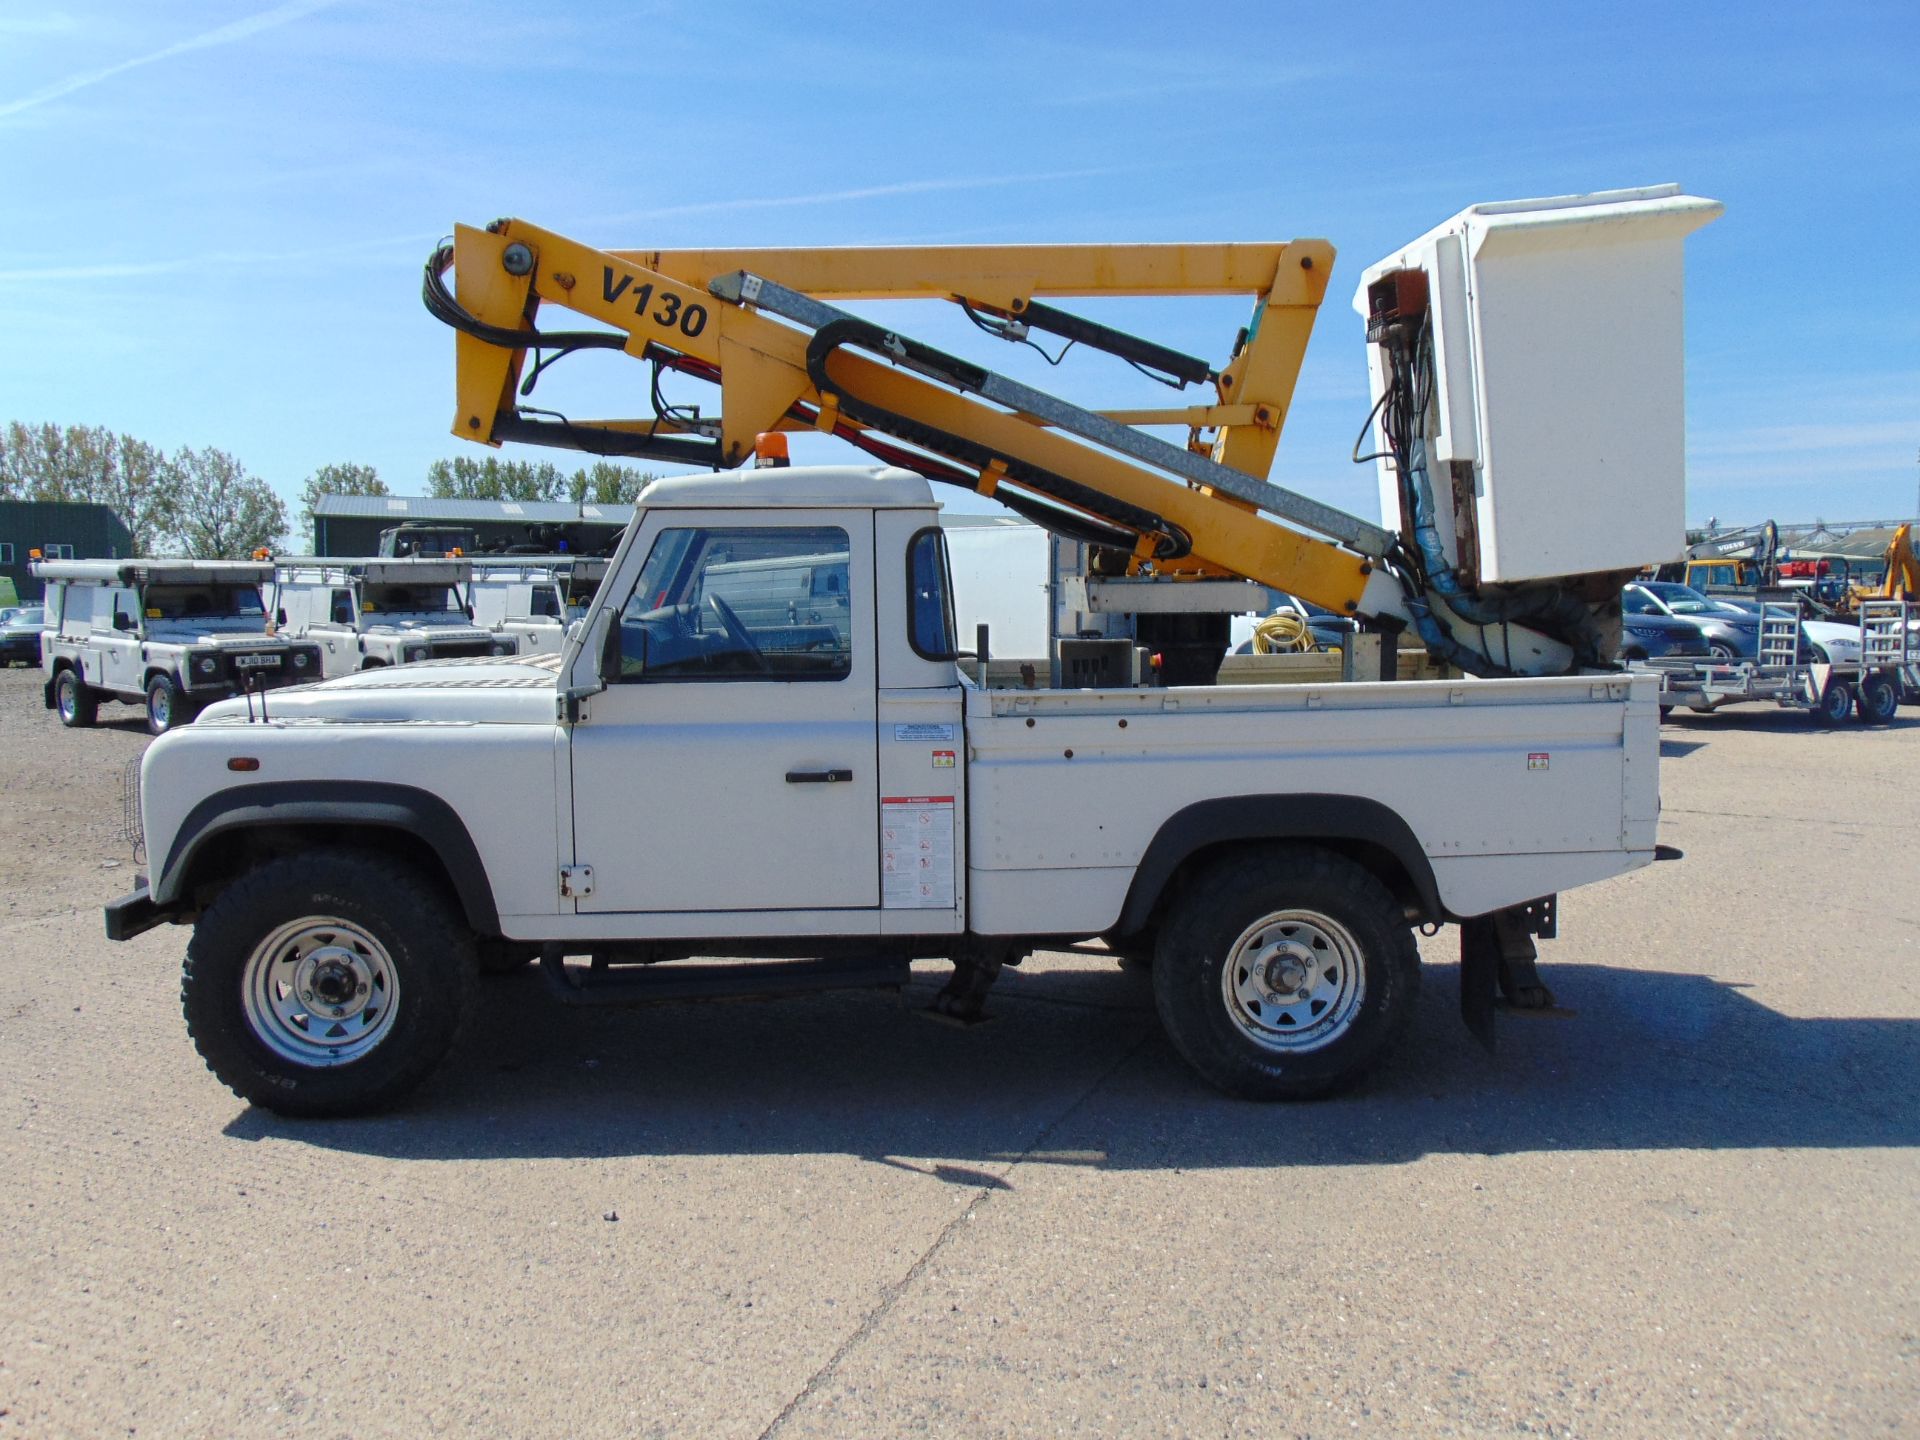 Land Rover Defender 110 High Capacity Cherry Picker - Image 4 of 26